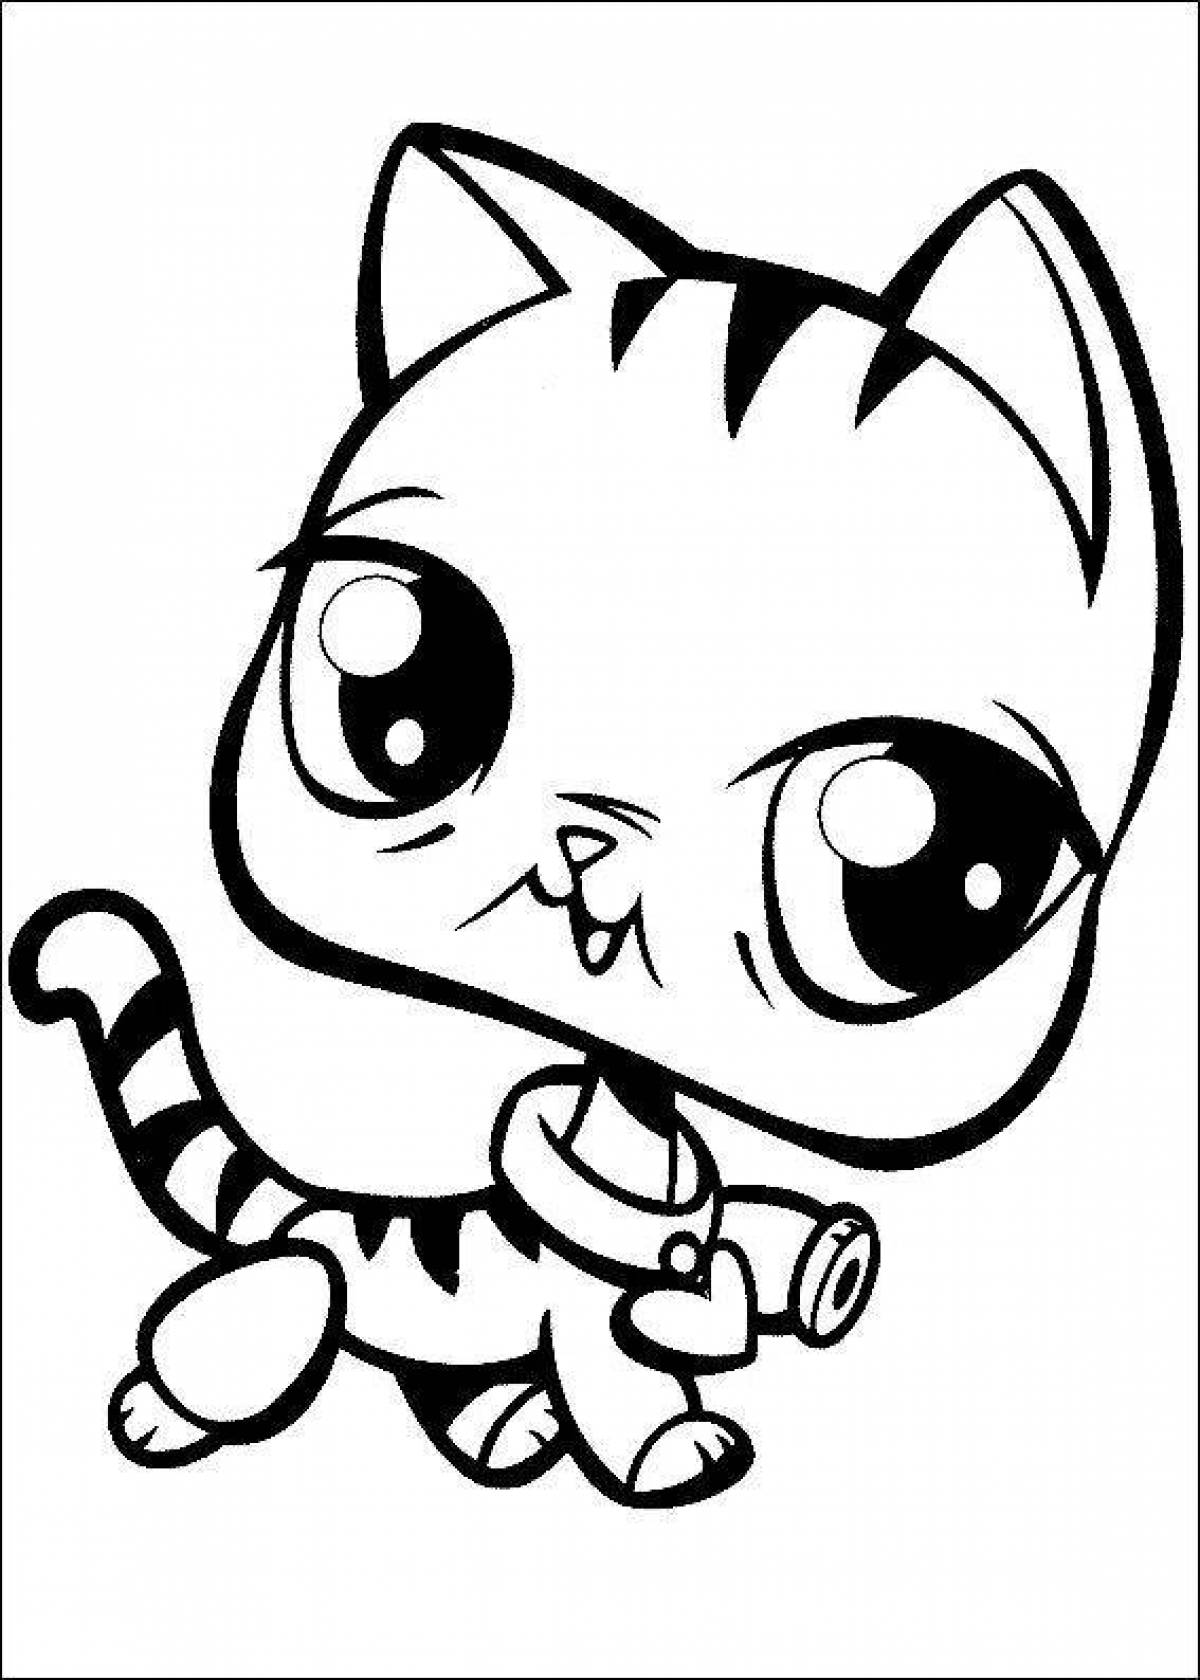 Naughty cute cat coloring page